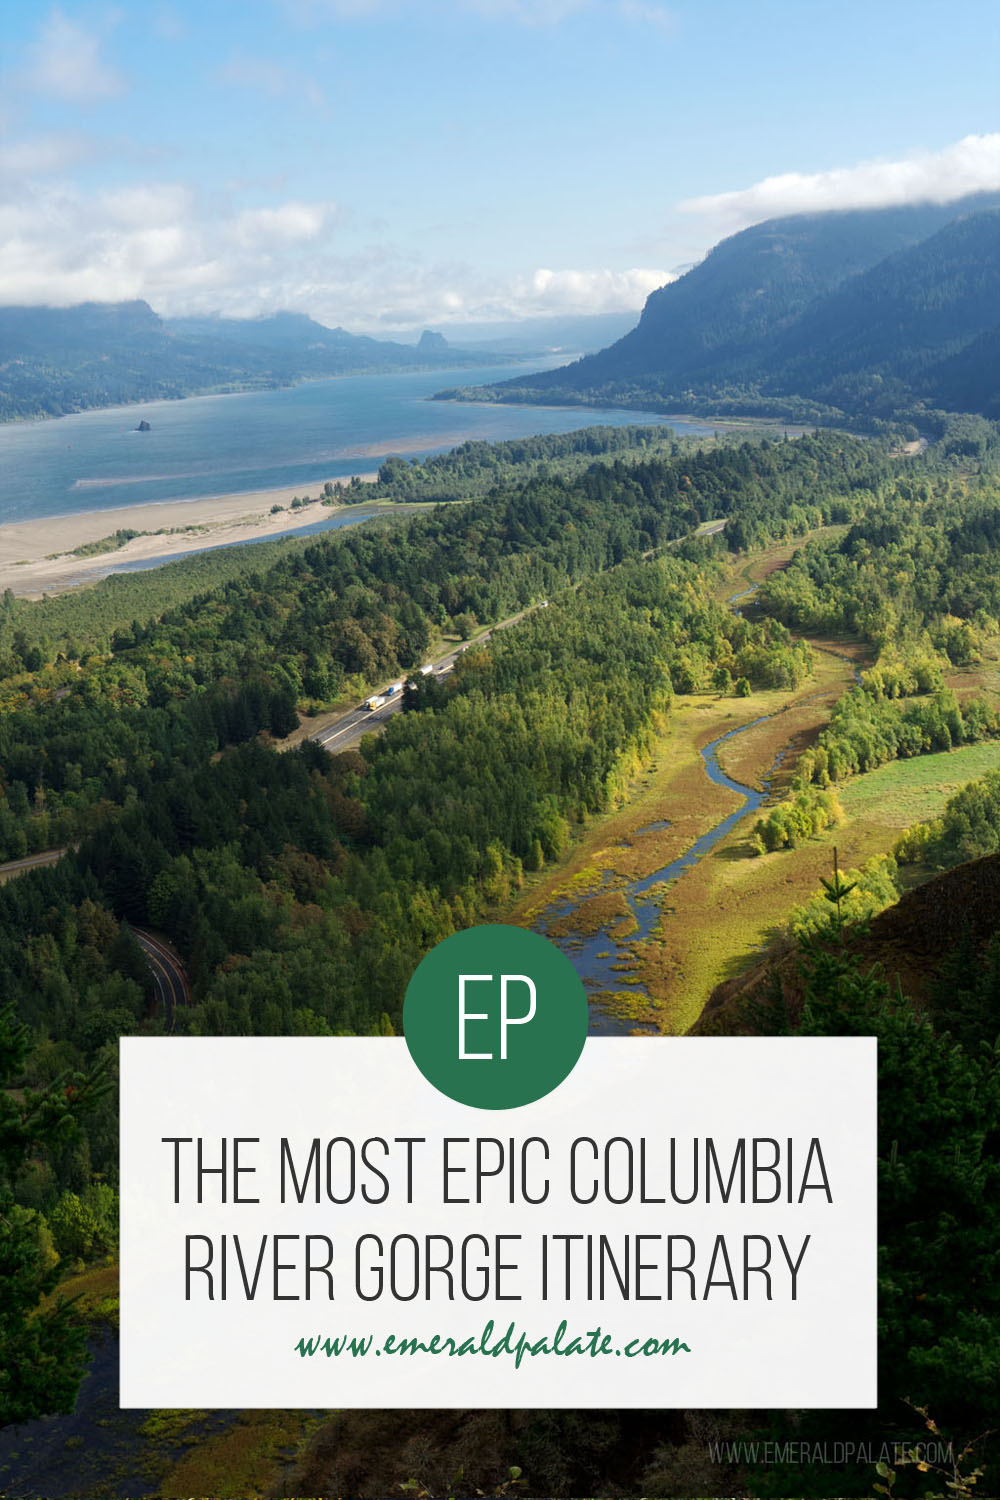 The most exciting Columbia River Gorge itinerary ever